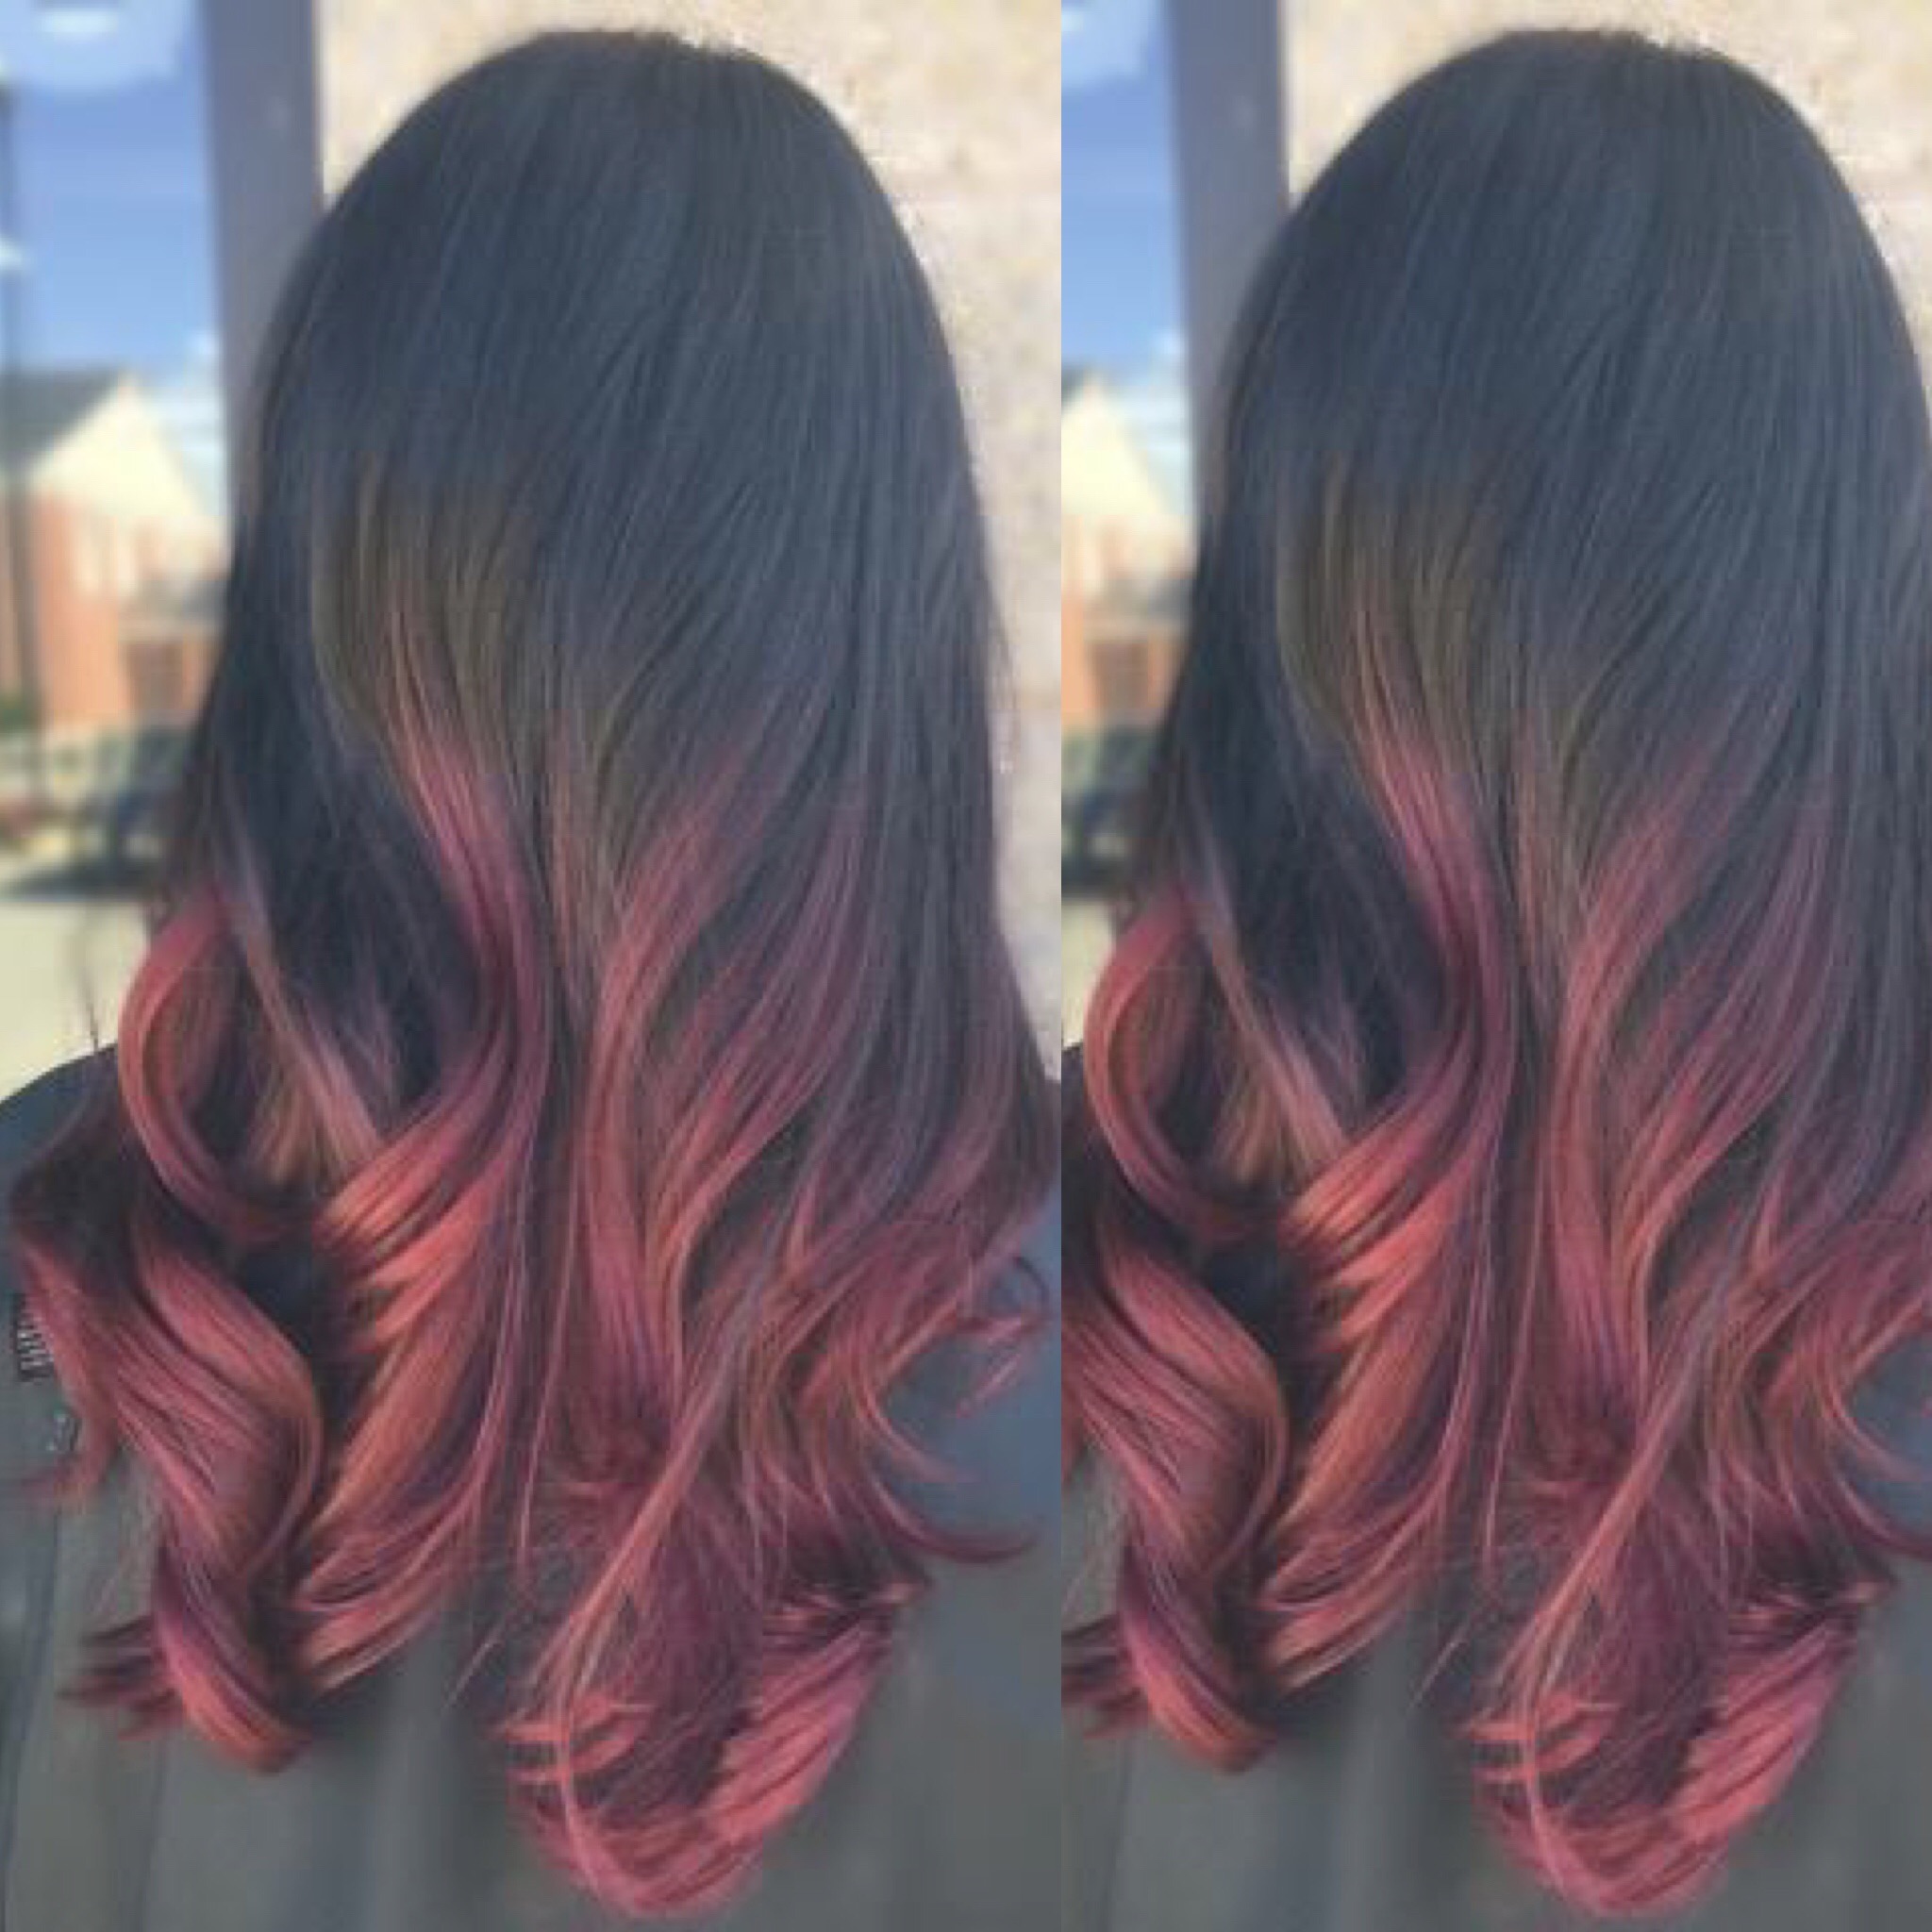 A black to red ombre done by Ashley